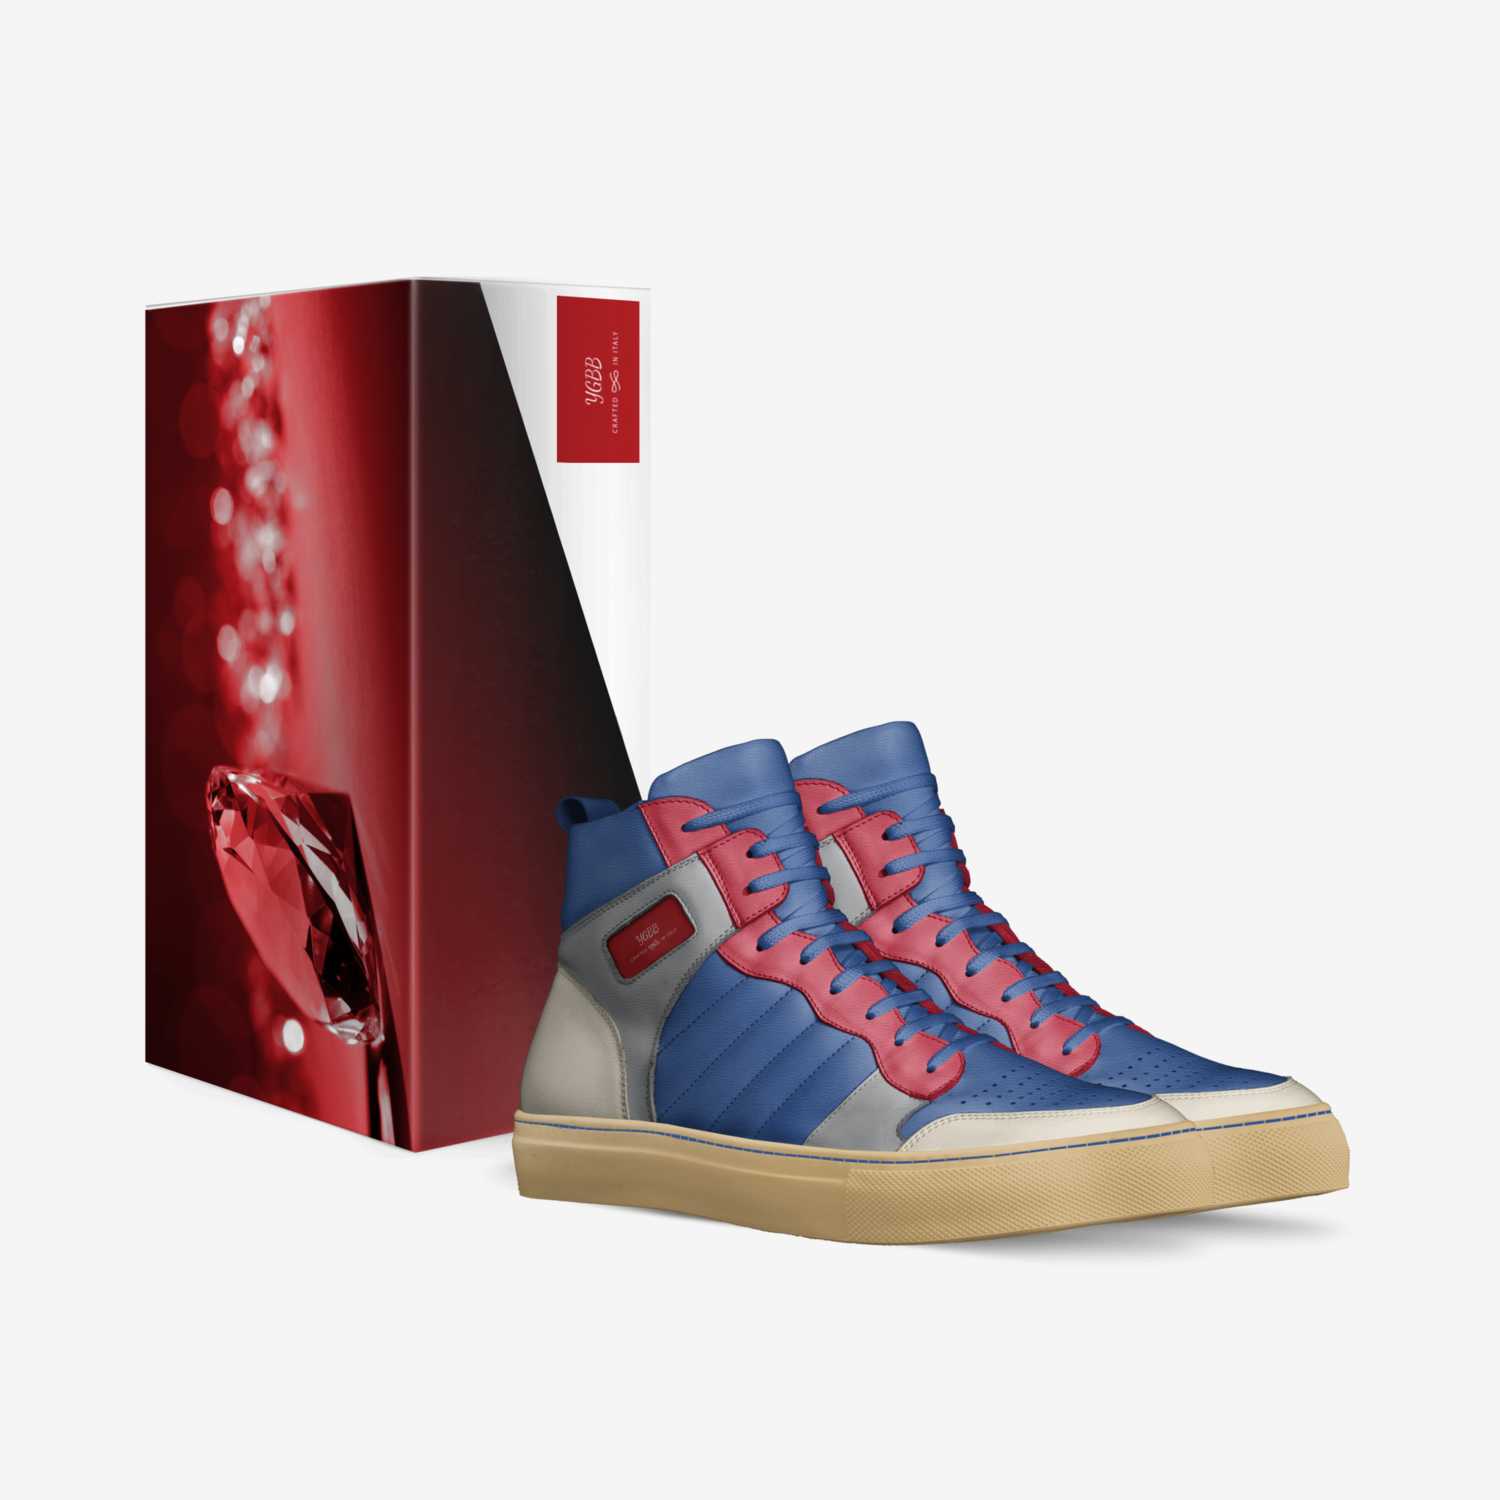 YGBB custom made in Italy shoes by Wilson Dorcely | Box view